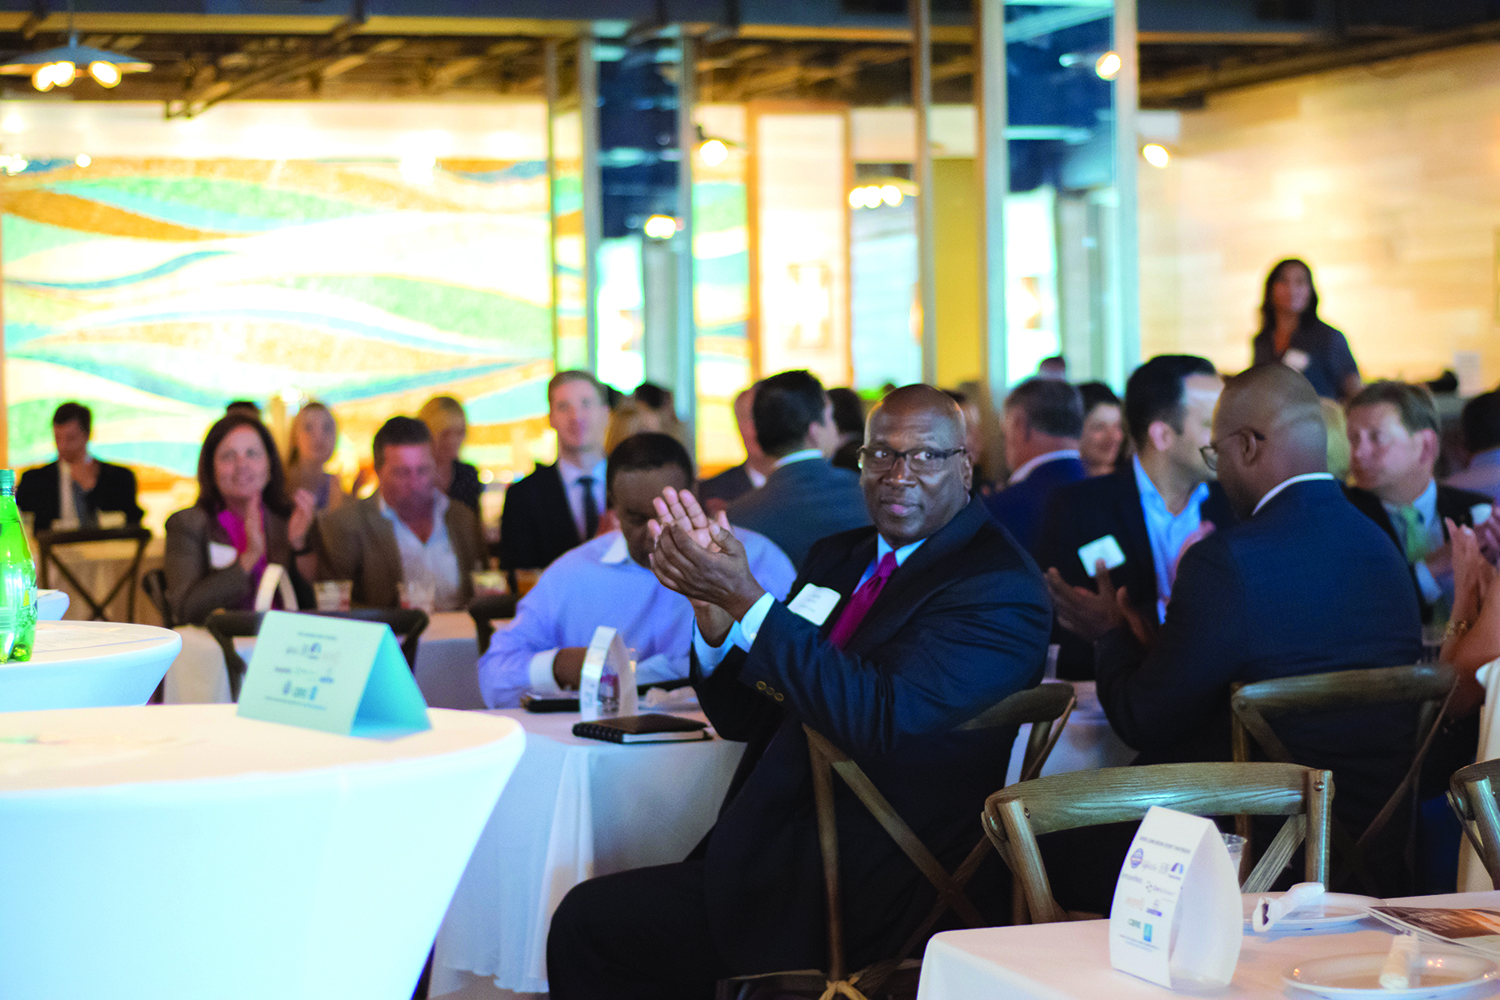 Members of the audience applaud during South Florida Executive Roundtable’s presentation